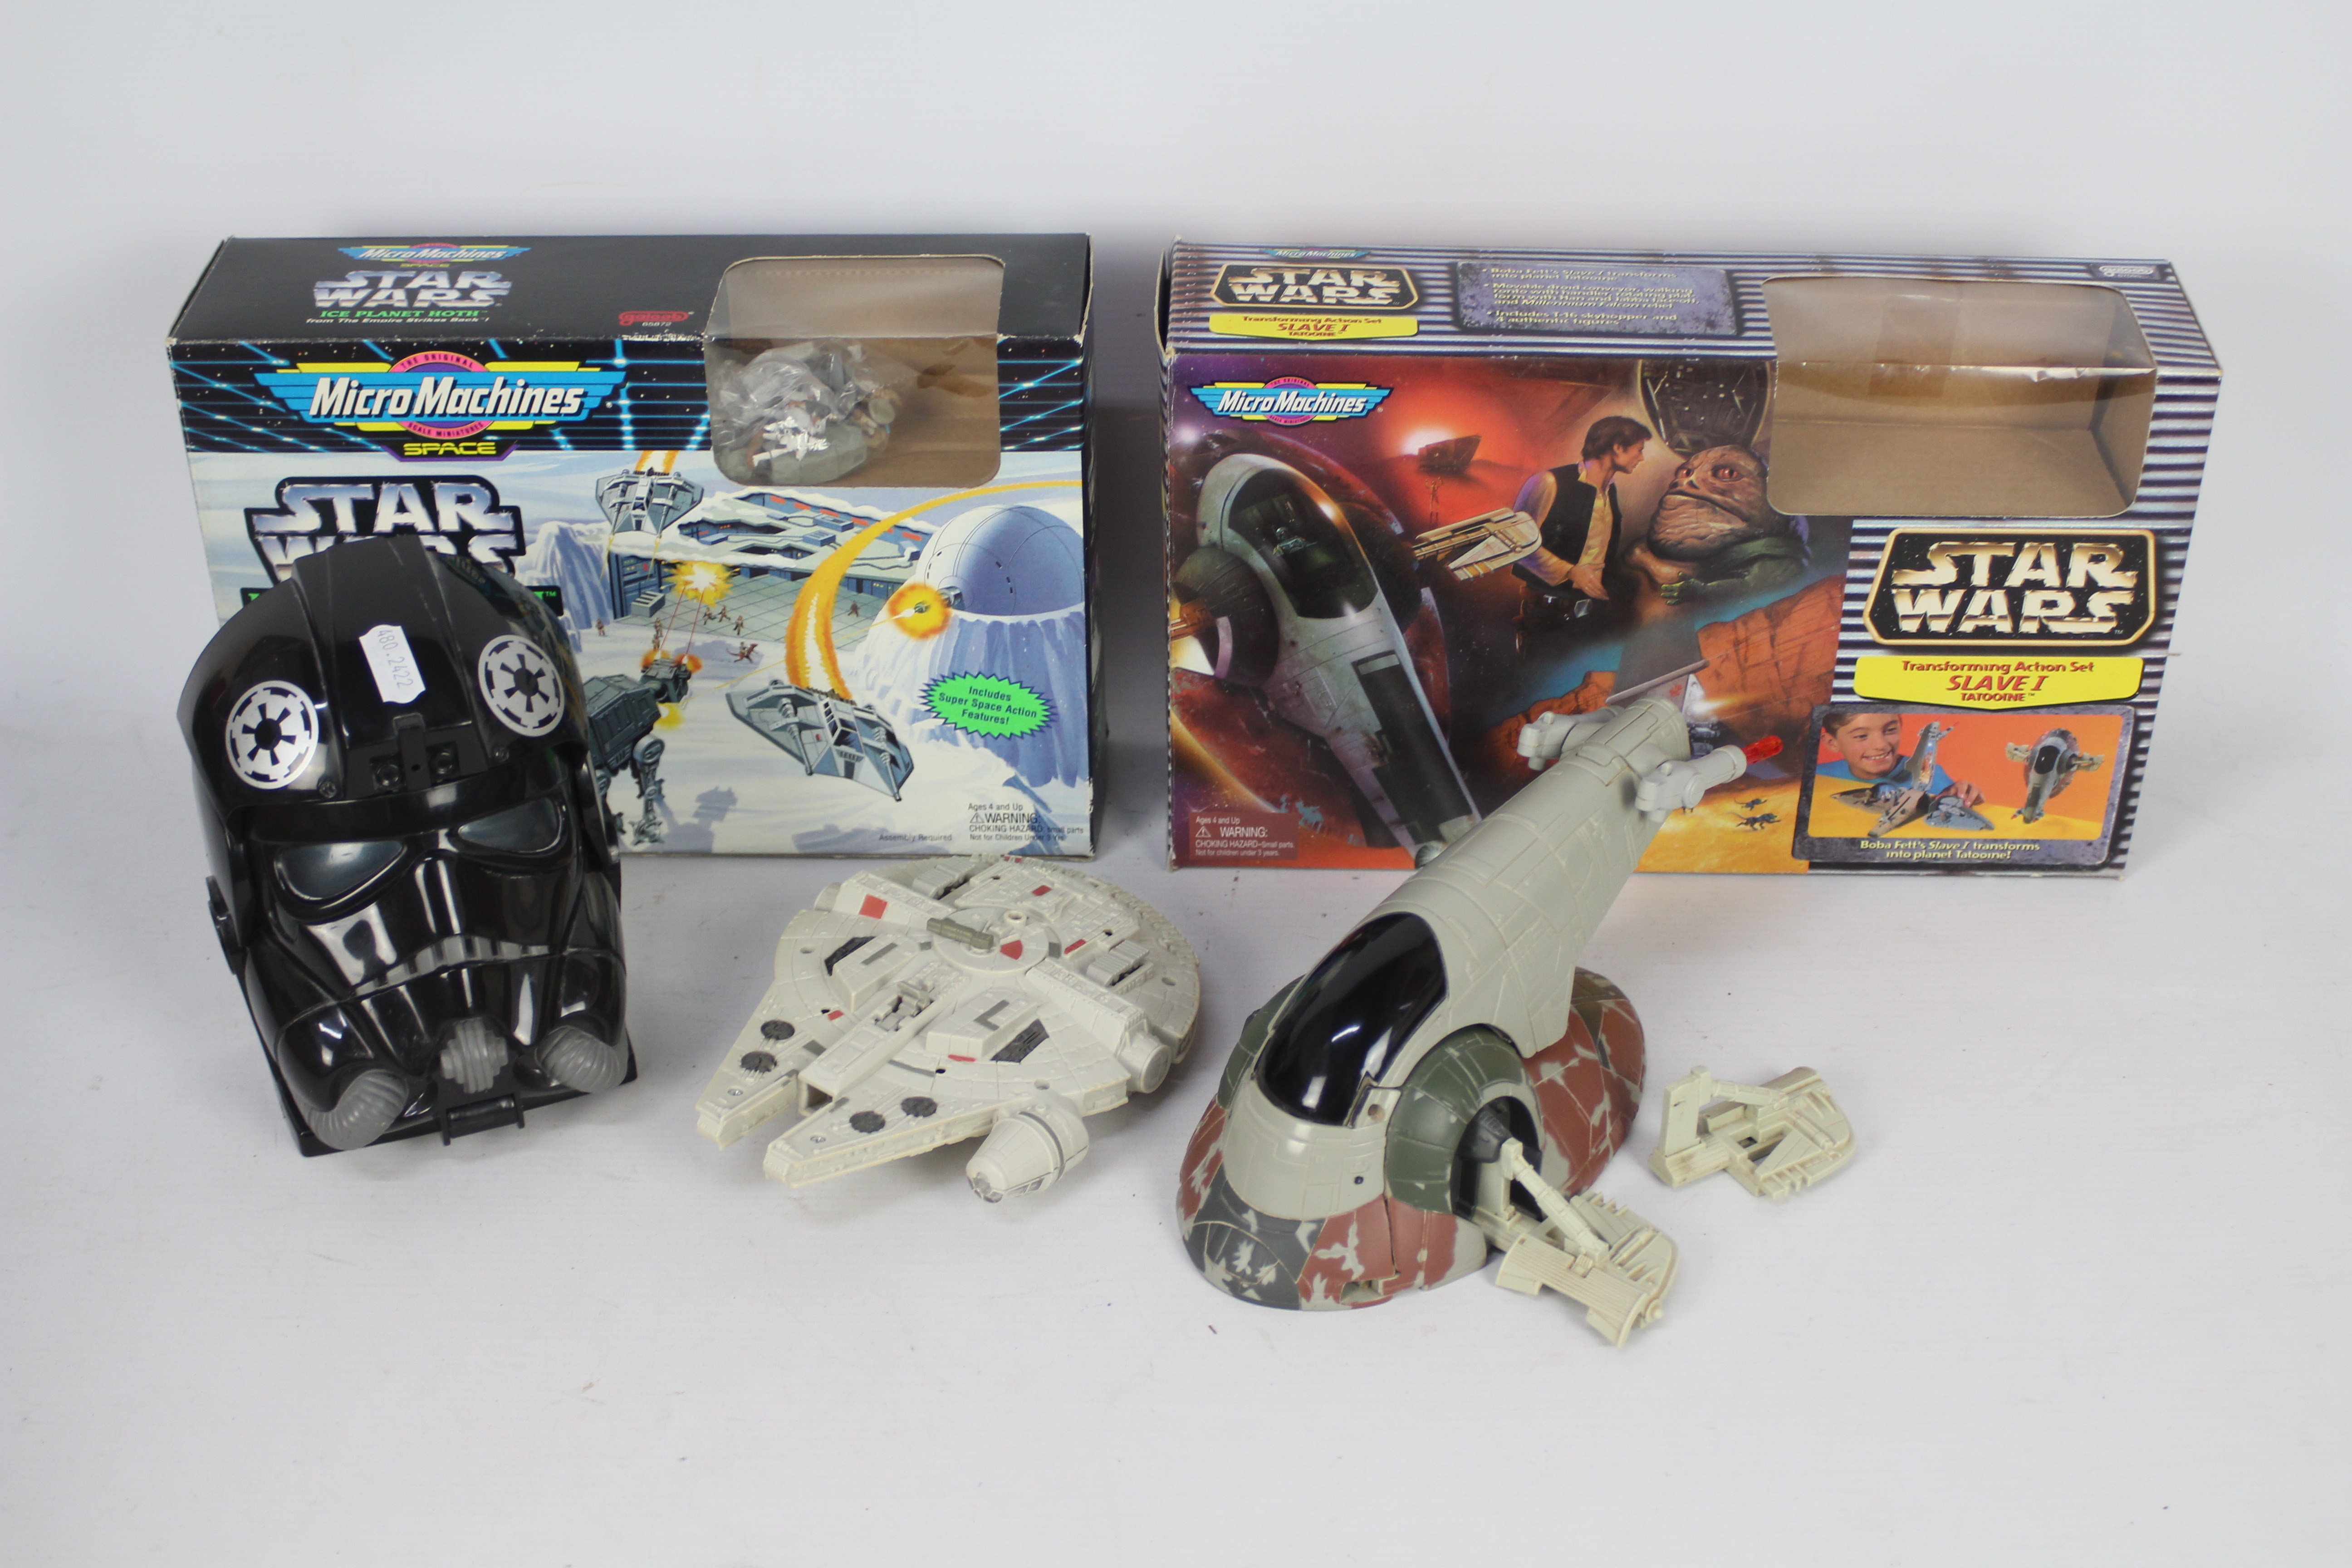 Star Wars, Galoob, Micro Machines - A collection of Galoob Star War Micro Machines.